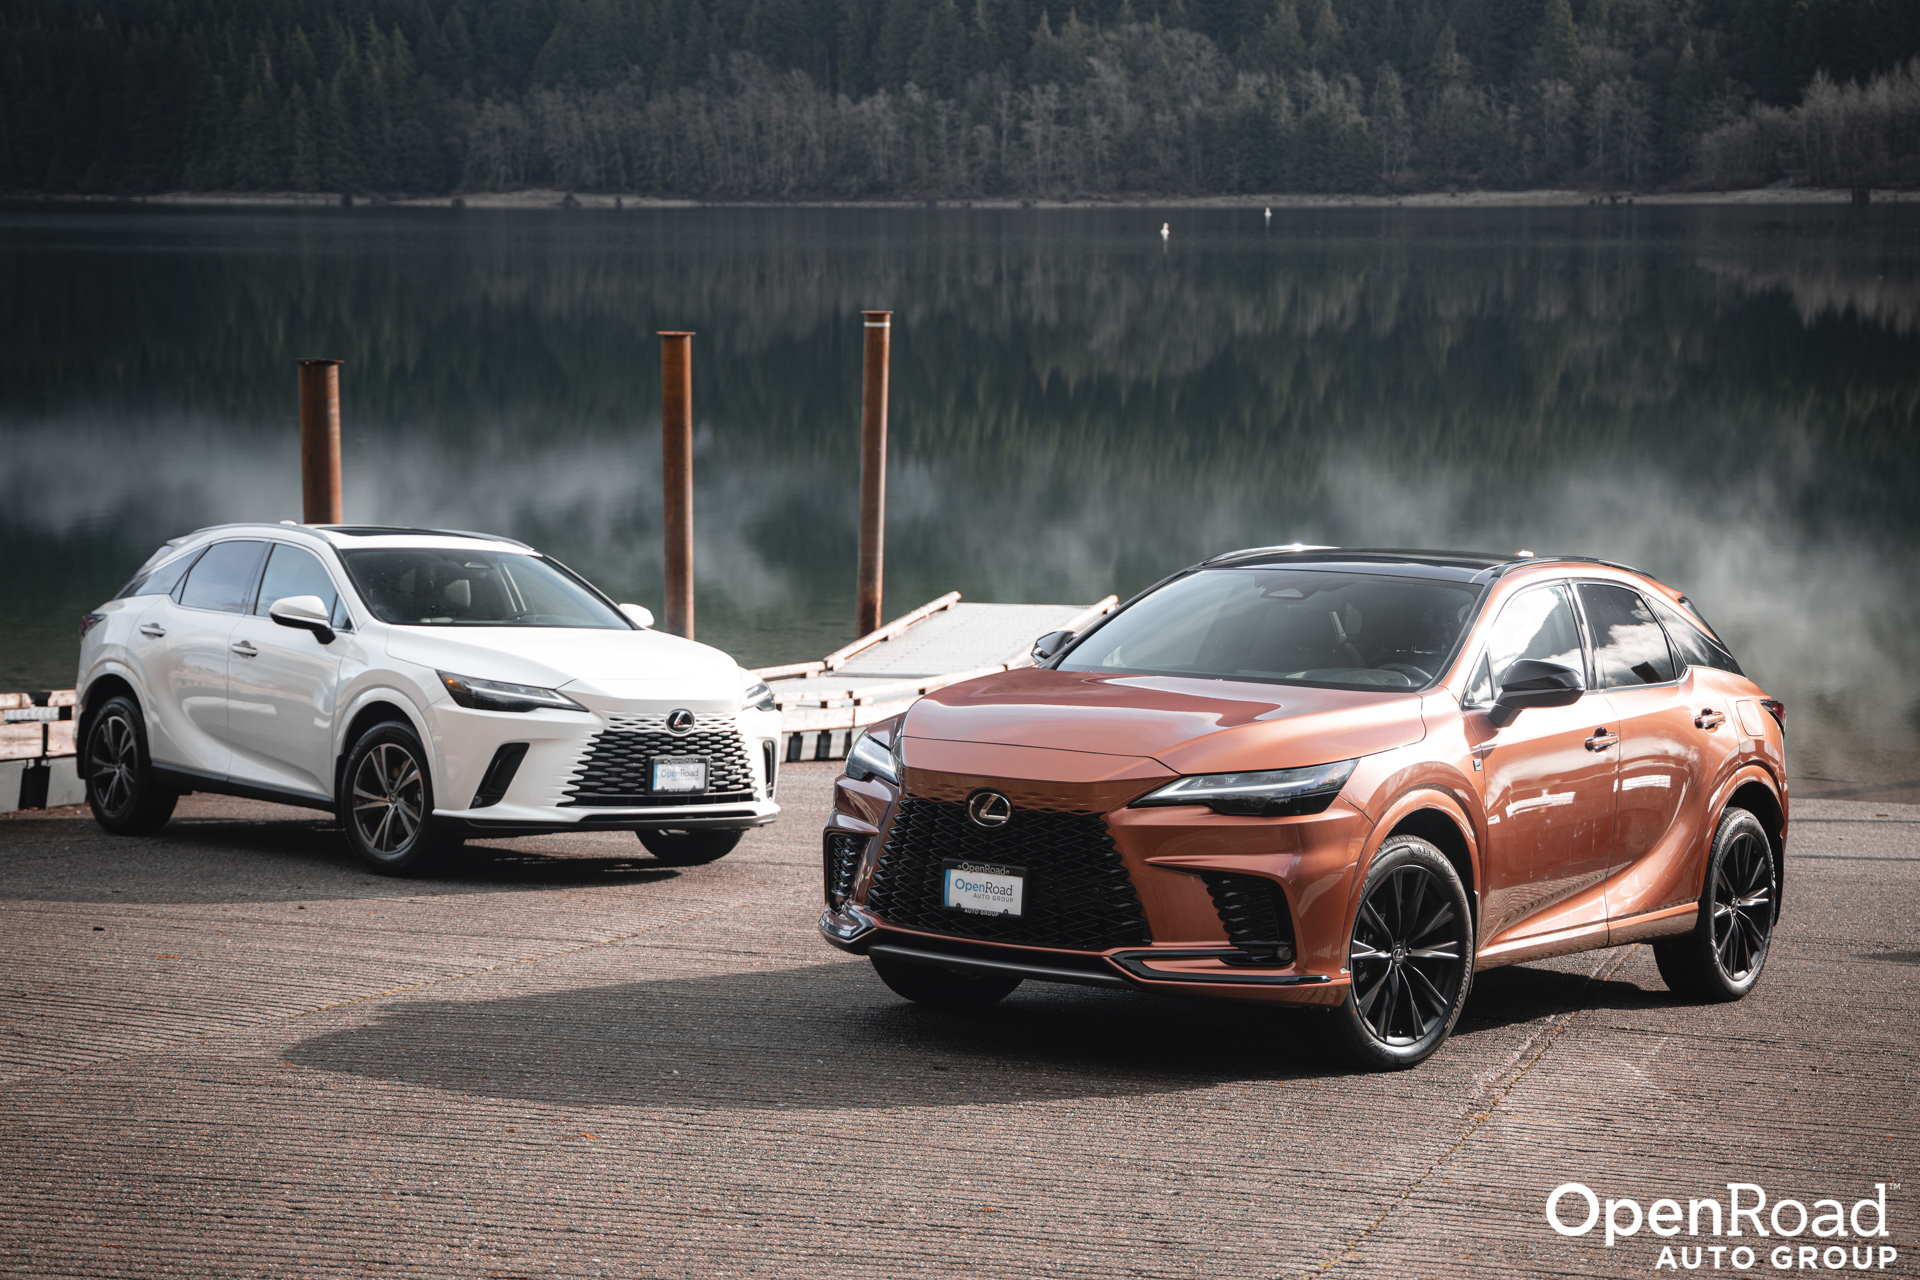 The 2023 Lexus RX is Redesigned and Reimagined